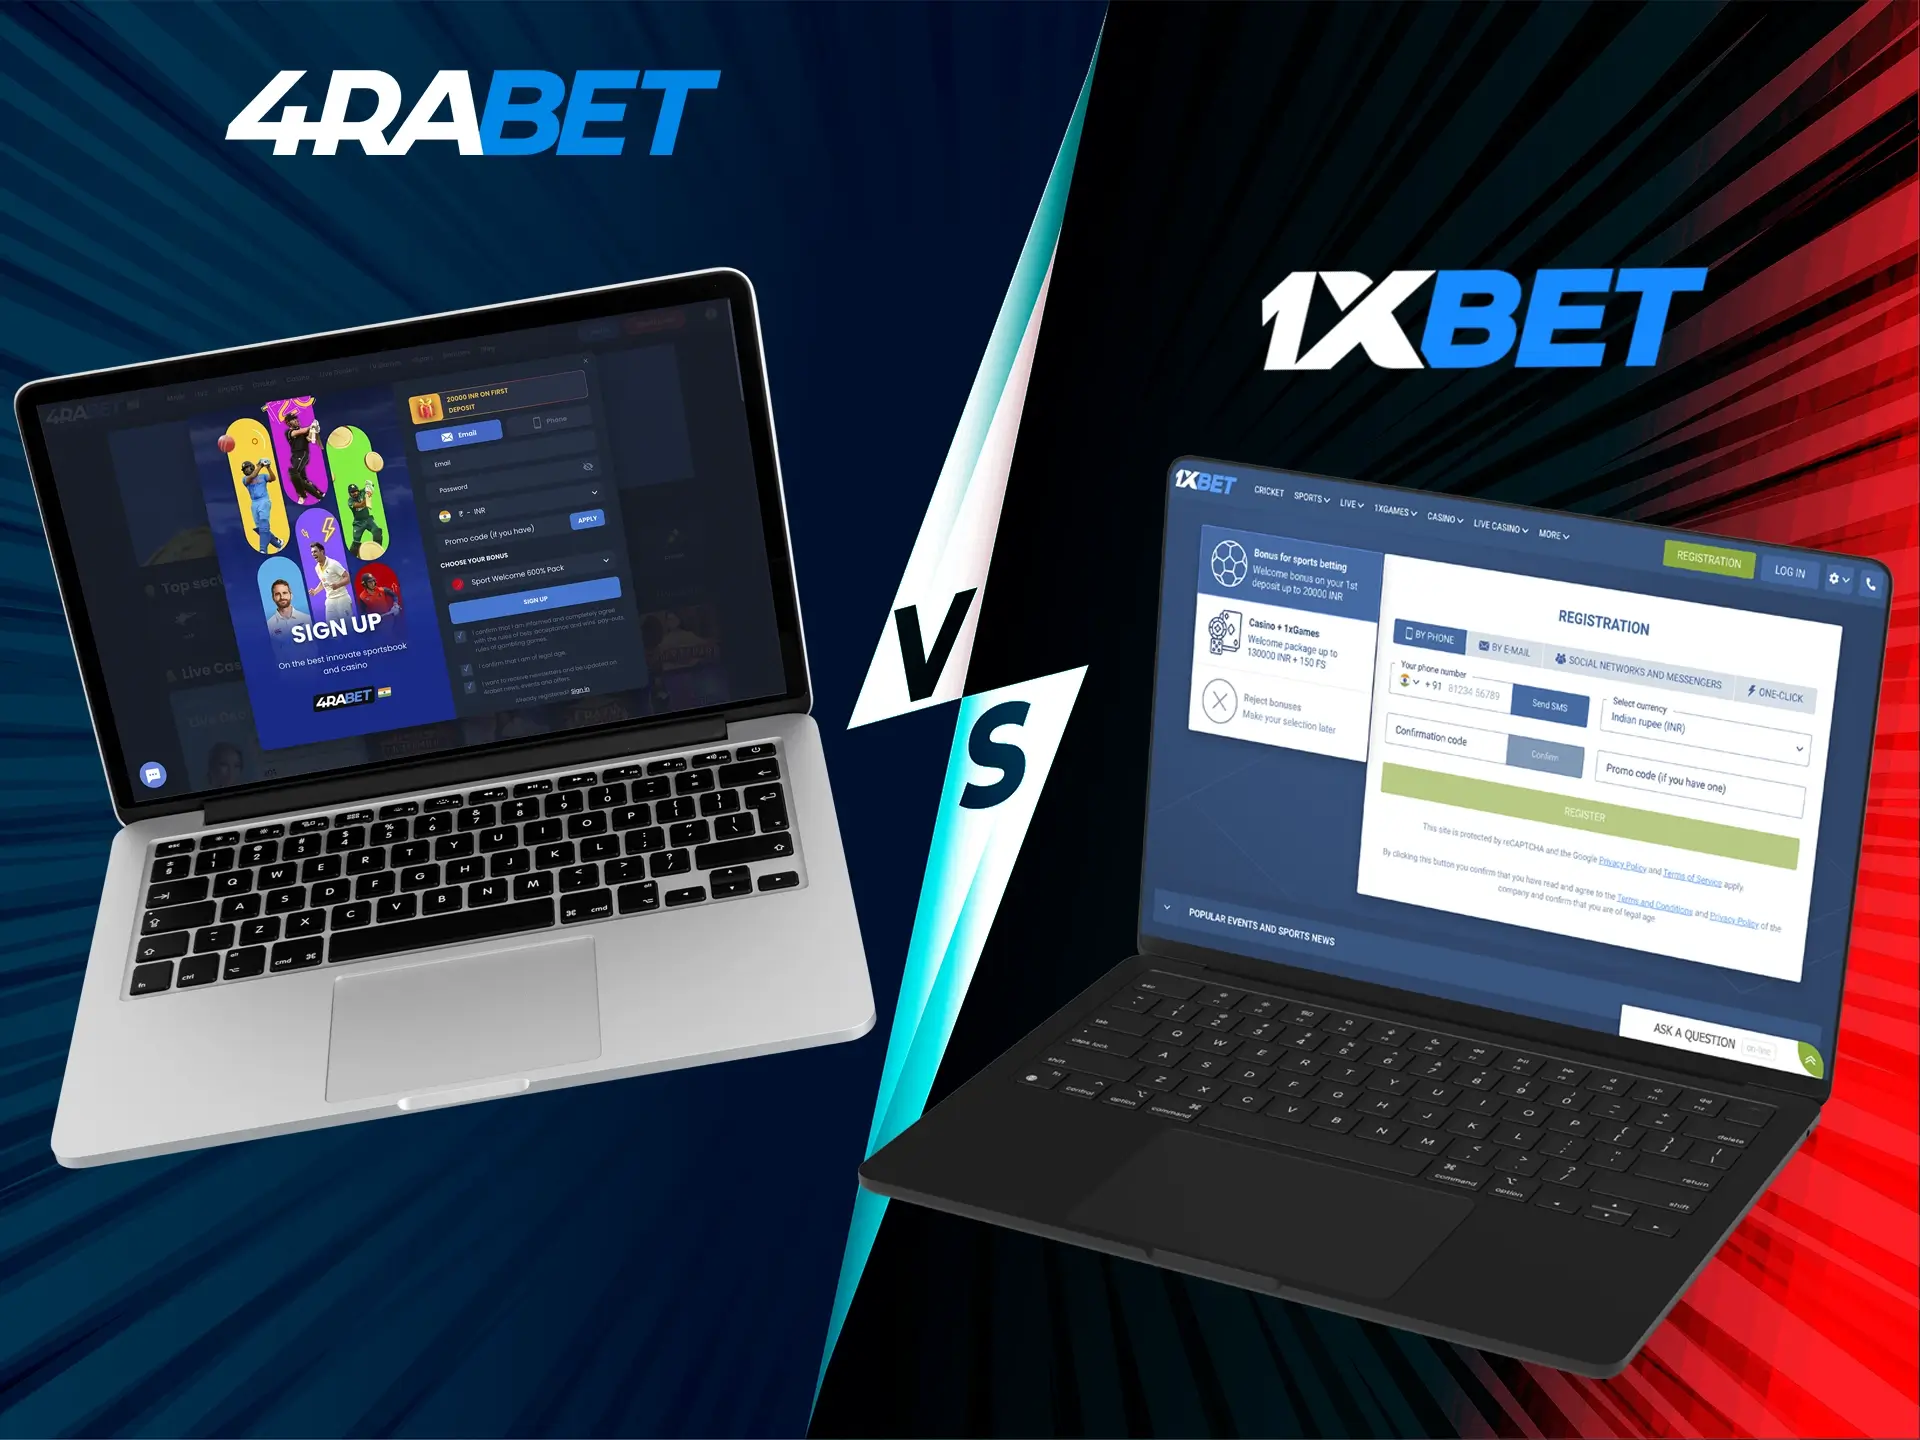 Registration is easy and straightforward with 1xbet and 4rabet.